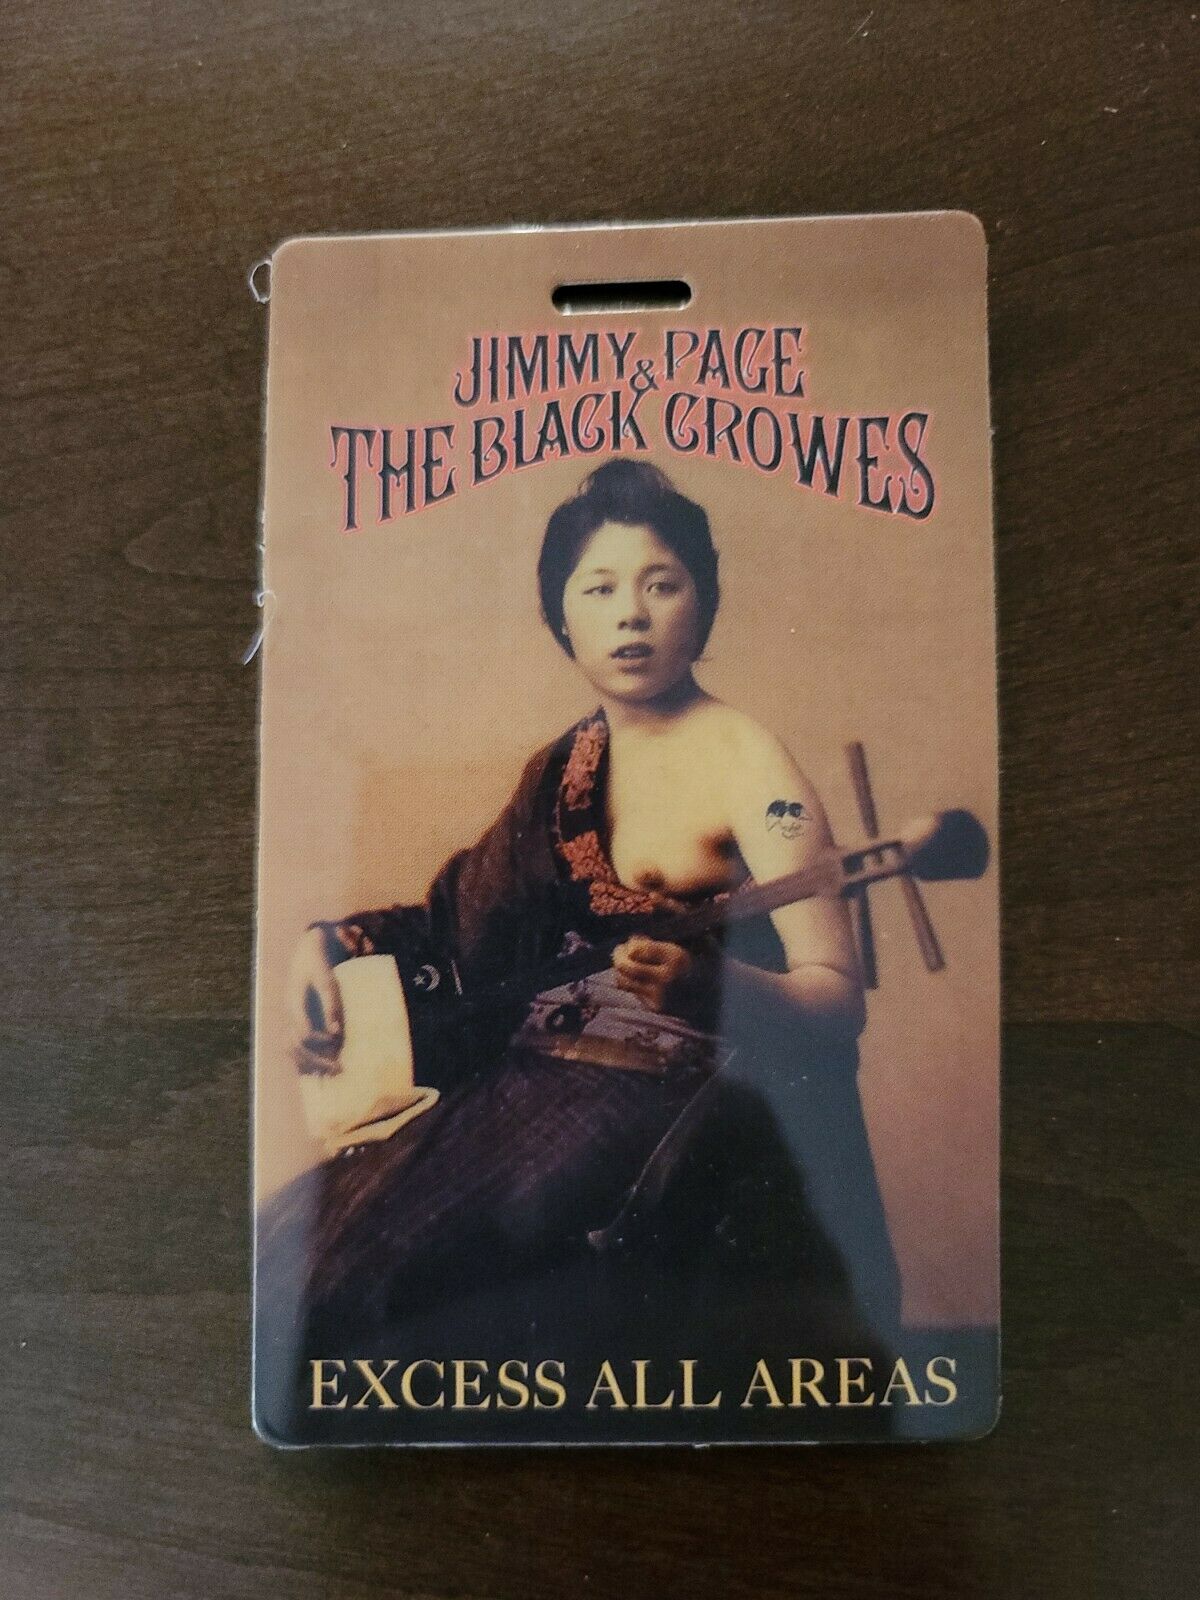 Jimmy Page Black Crowes 2000, Original Backstage All Access Pass Concert Ticket